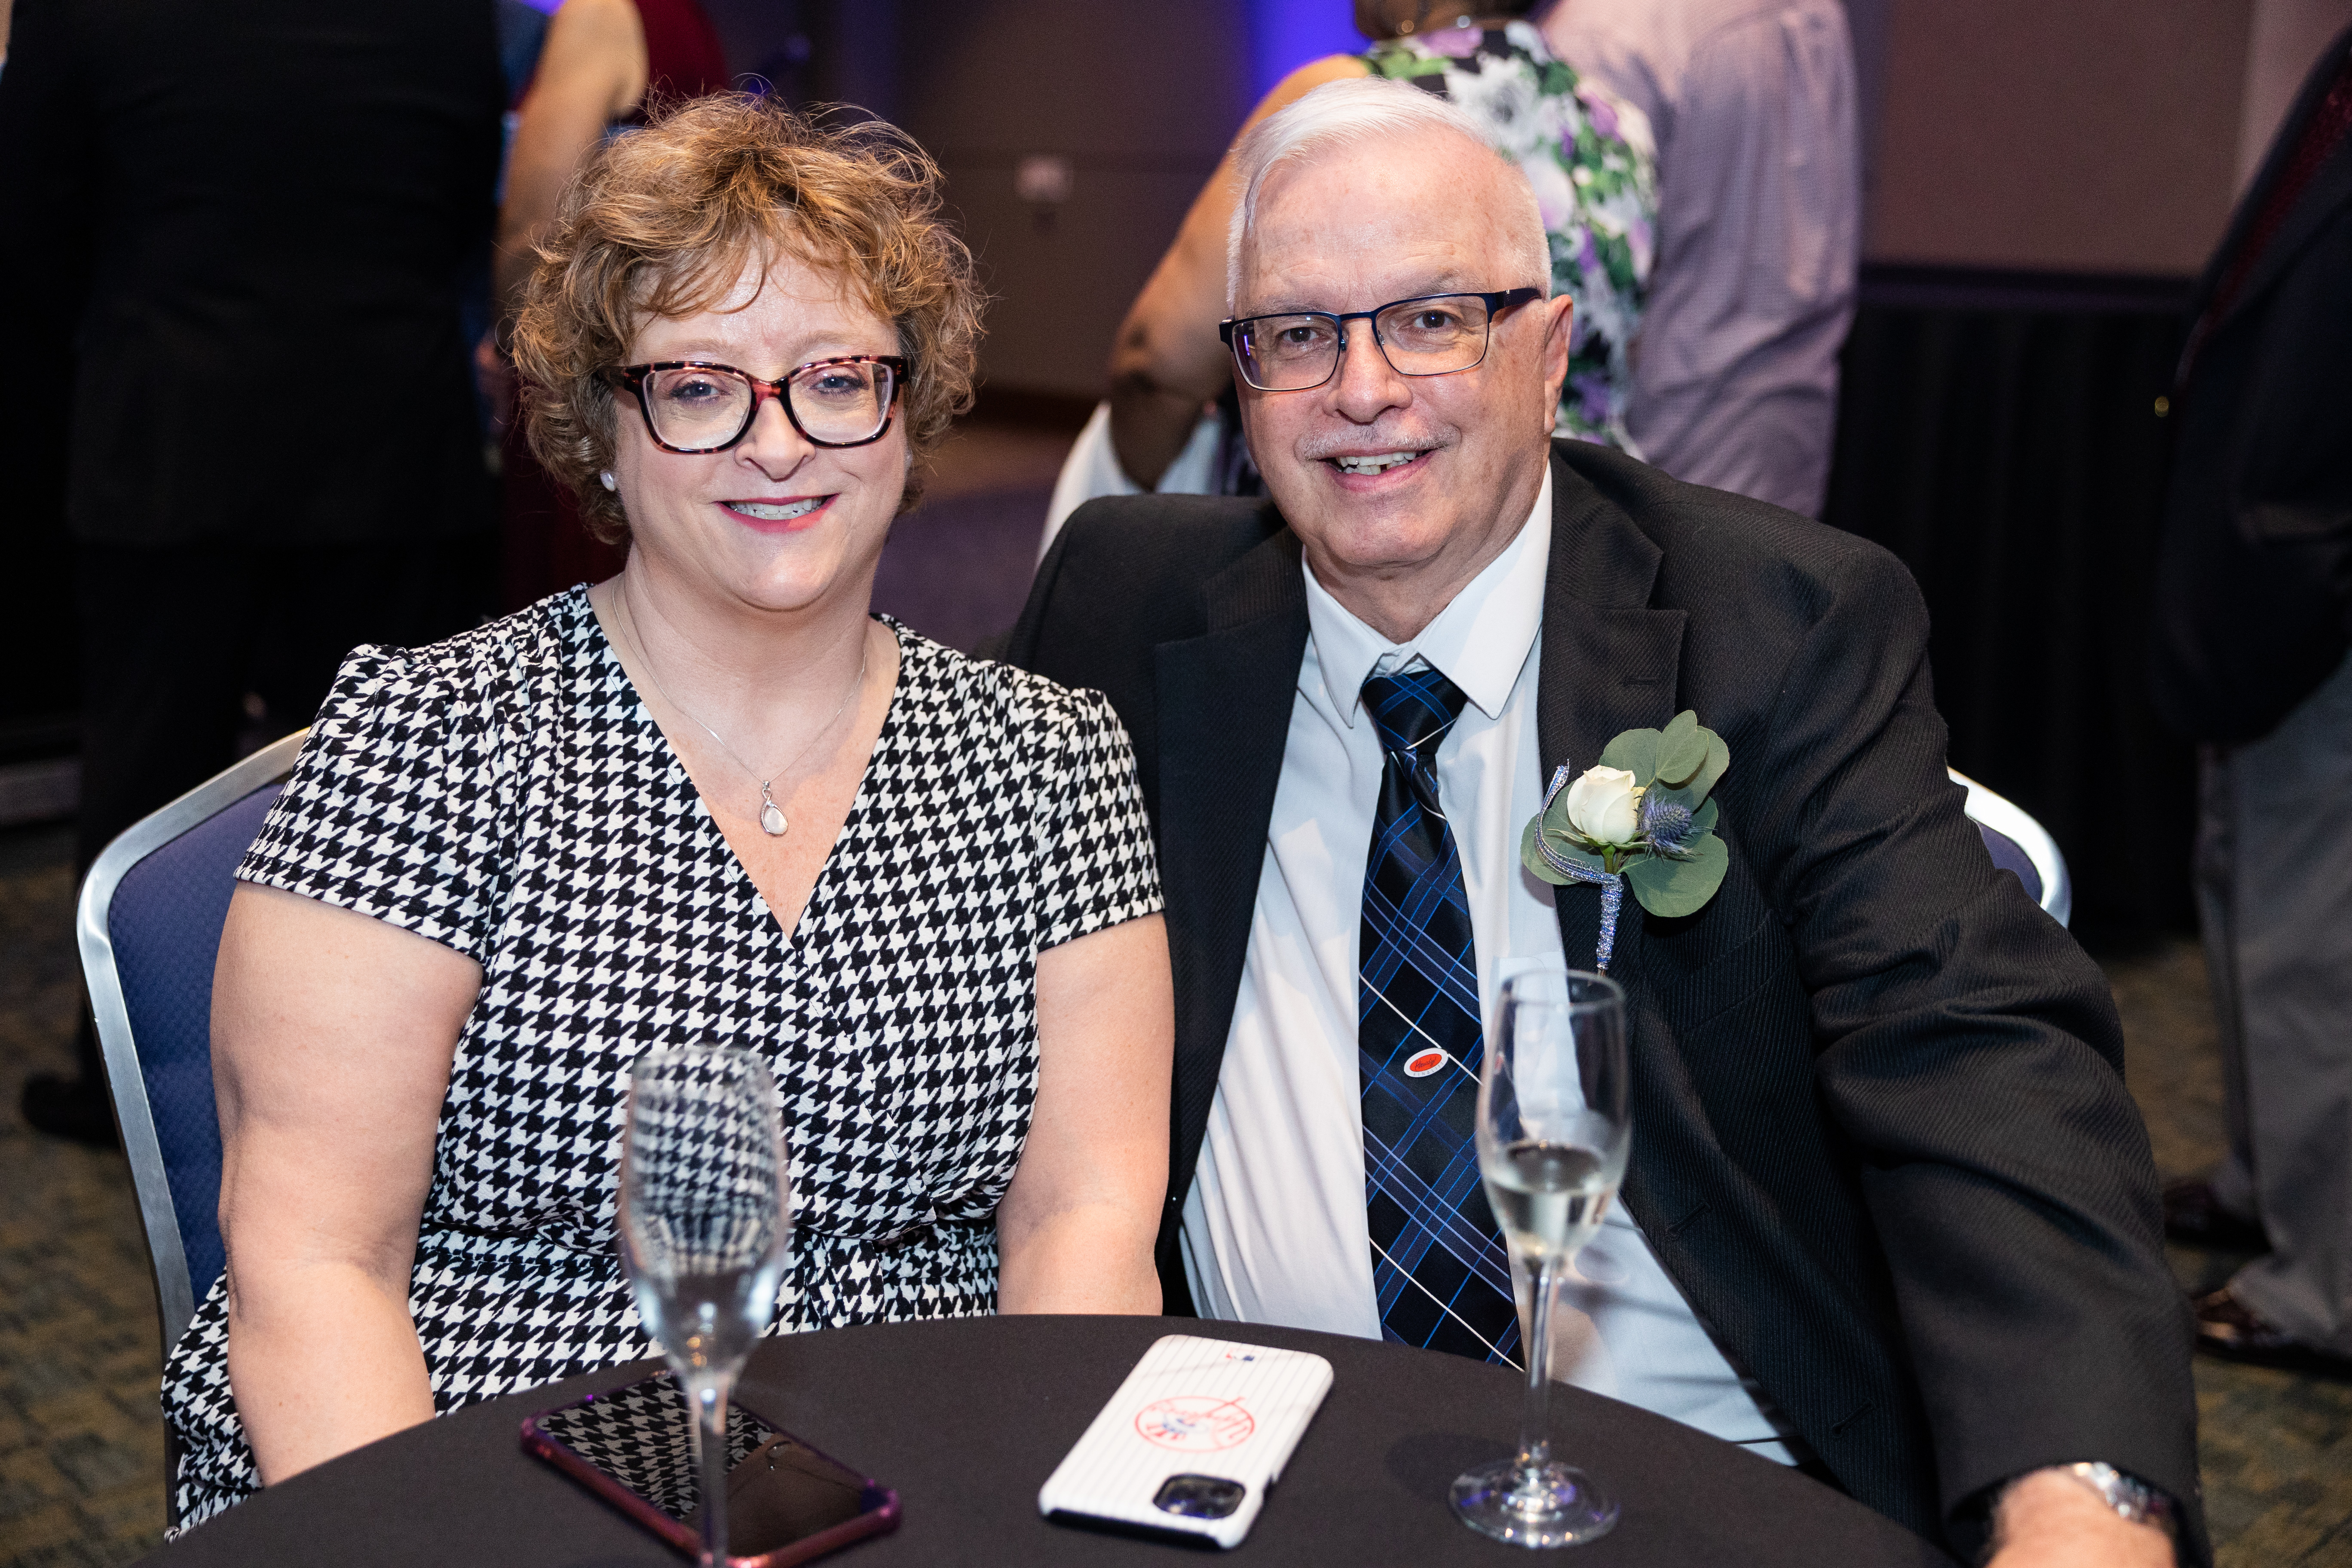 Finalist Yates Greenhalgh, a cashier at Big Y who won in the retail category, with his wife Corrine Greenhalgh at the 25th annual Howdy Awards for Hospitality Excellence held at the MassMutual Center Monday evening, May 16, 2022. (Hoang ‘Leon’ Nguyen / The Republican)